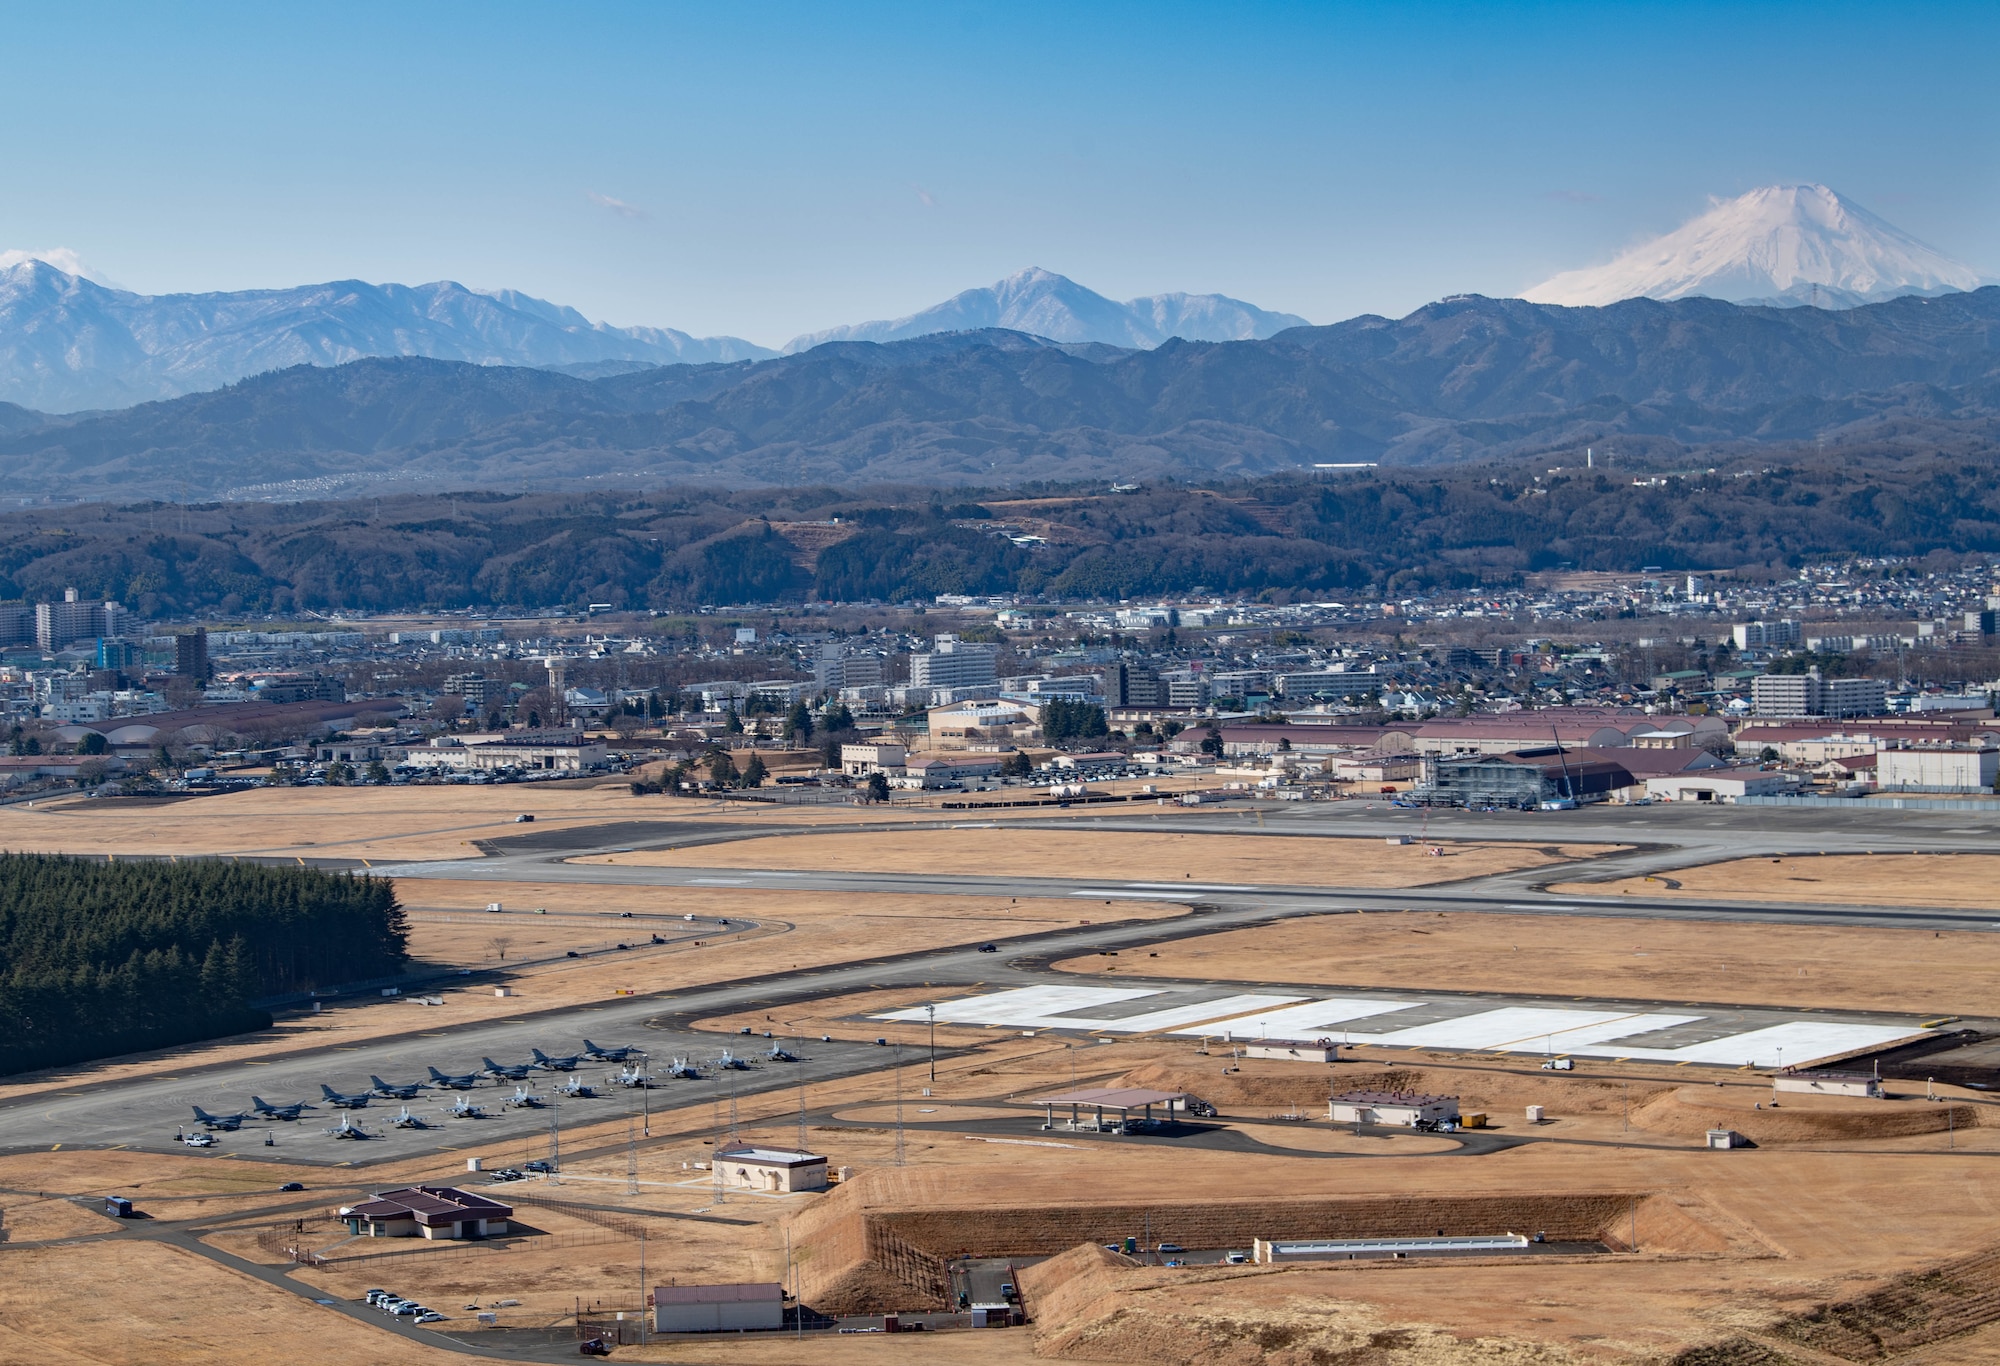 A wide photograph of the Yokota flightline with the town behind it and mountains beyond that. 15 F-16s sit on the flightline in the foreground.